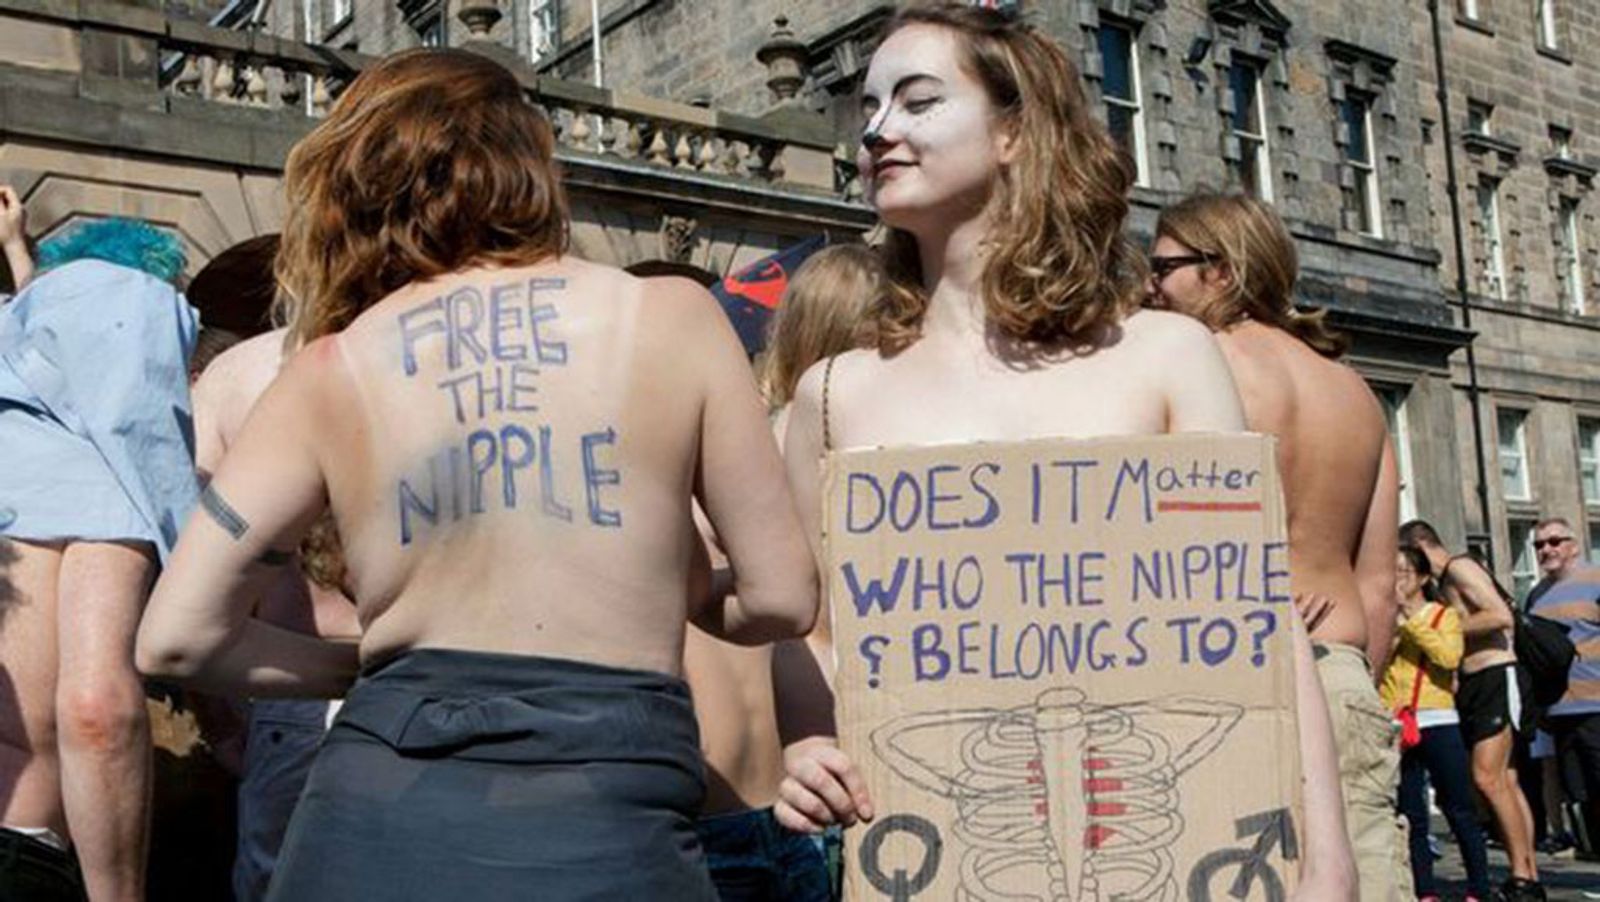 Springfield, Missouri Federal Judge Rules for Nipple Equality